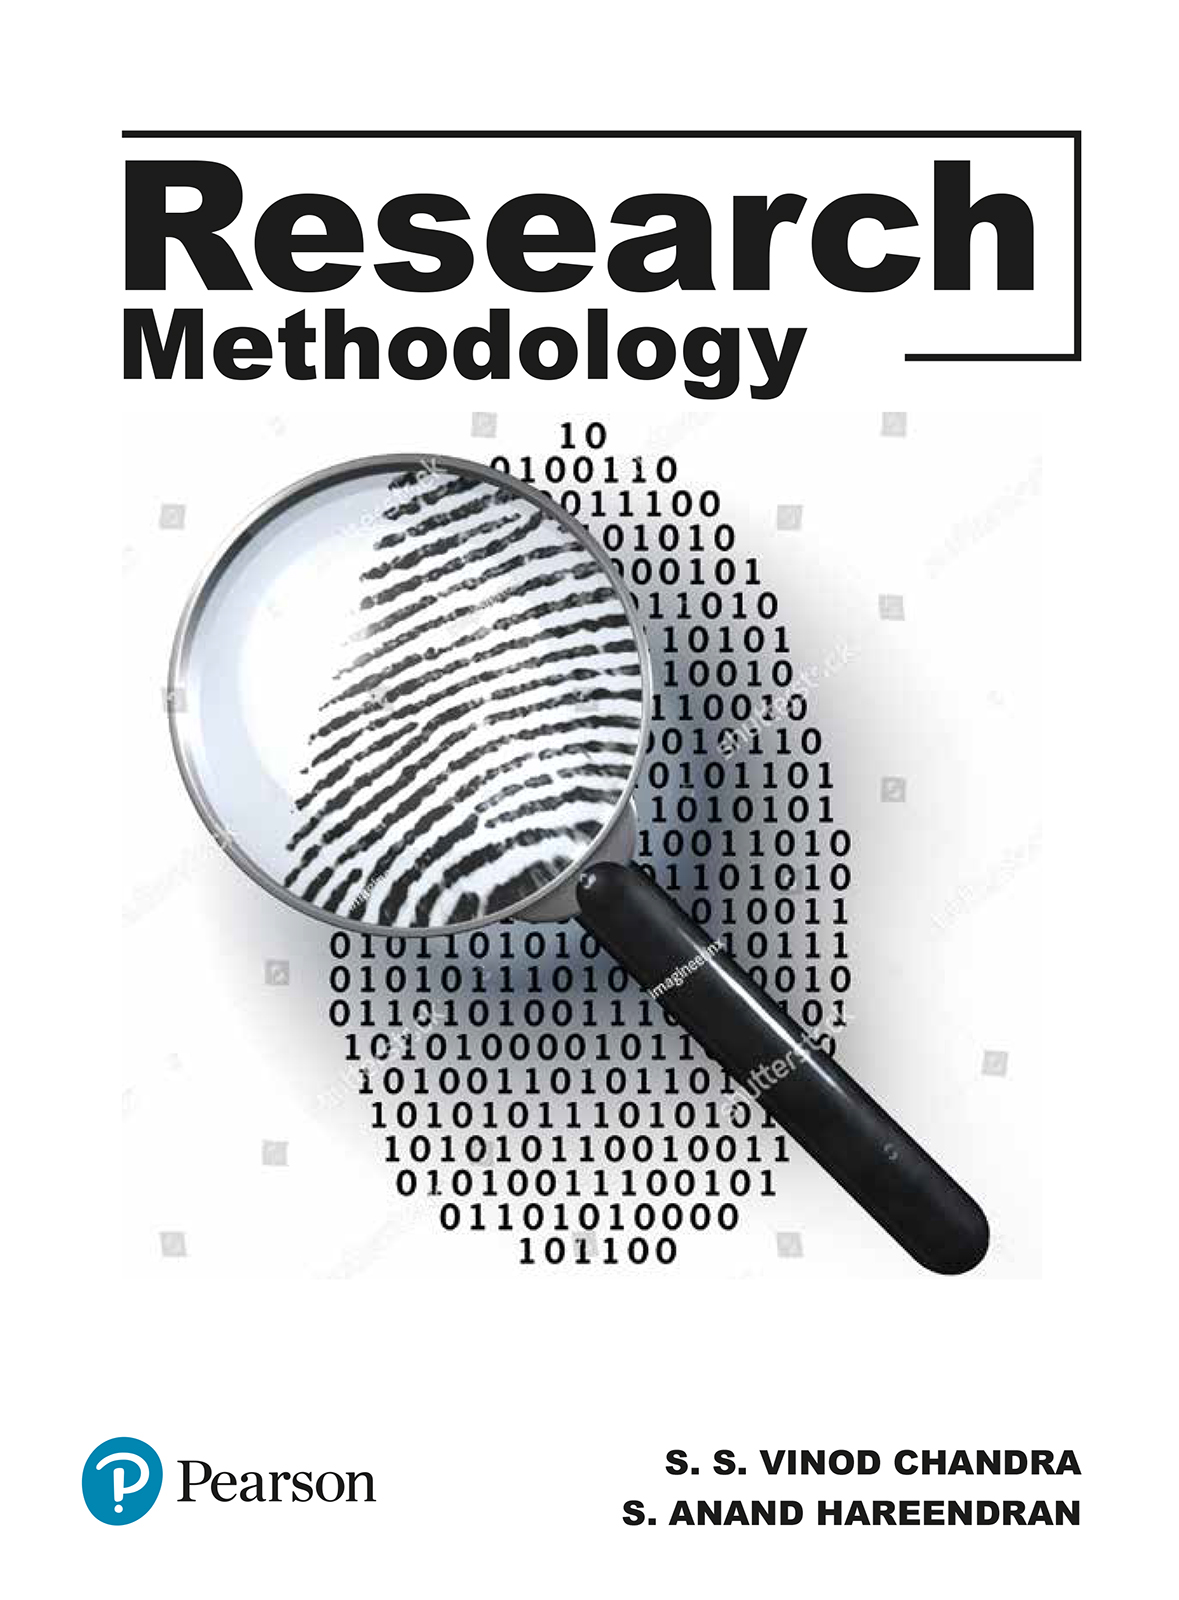 research methodology education book